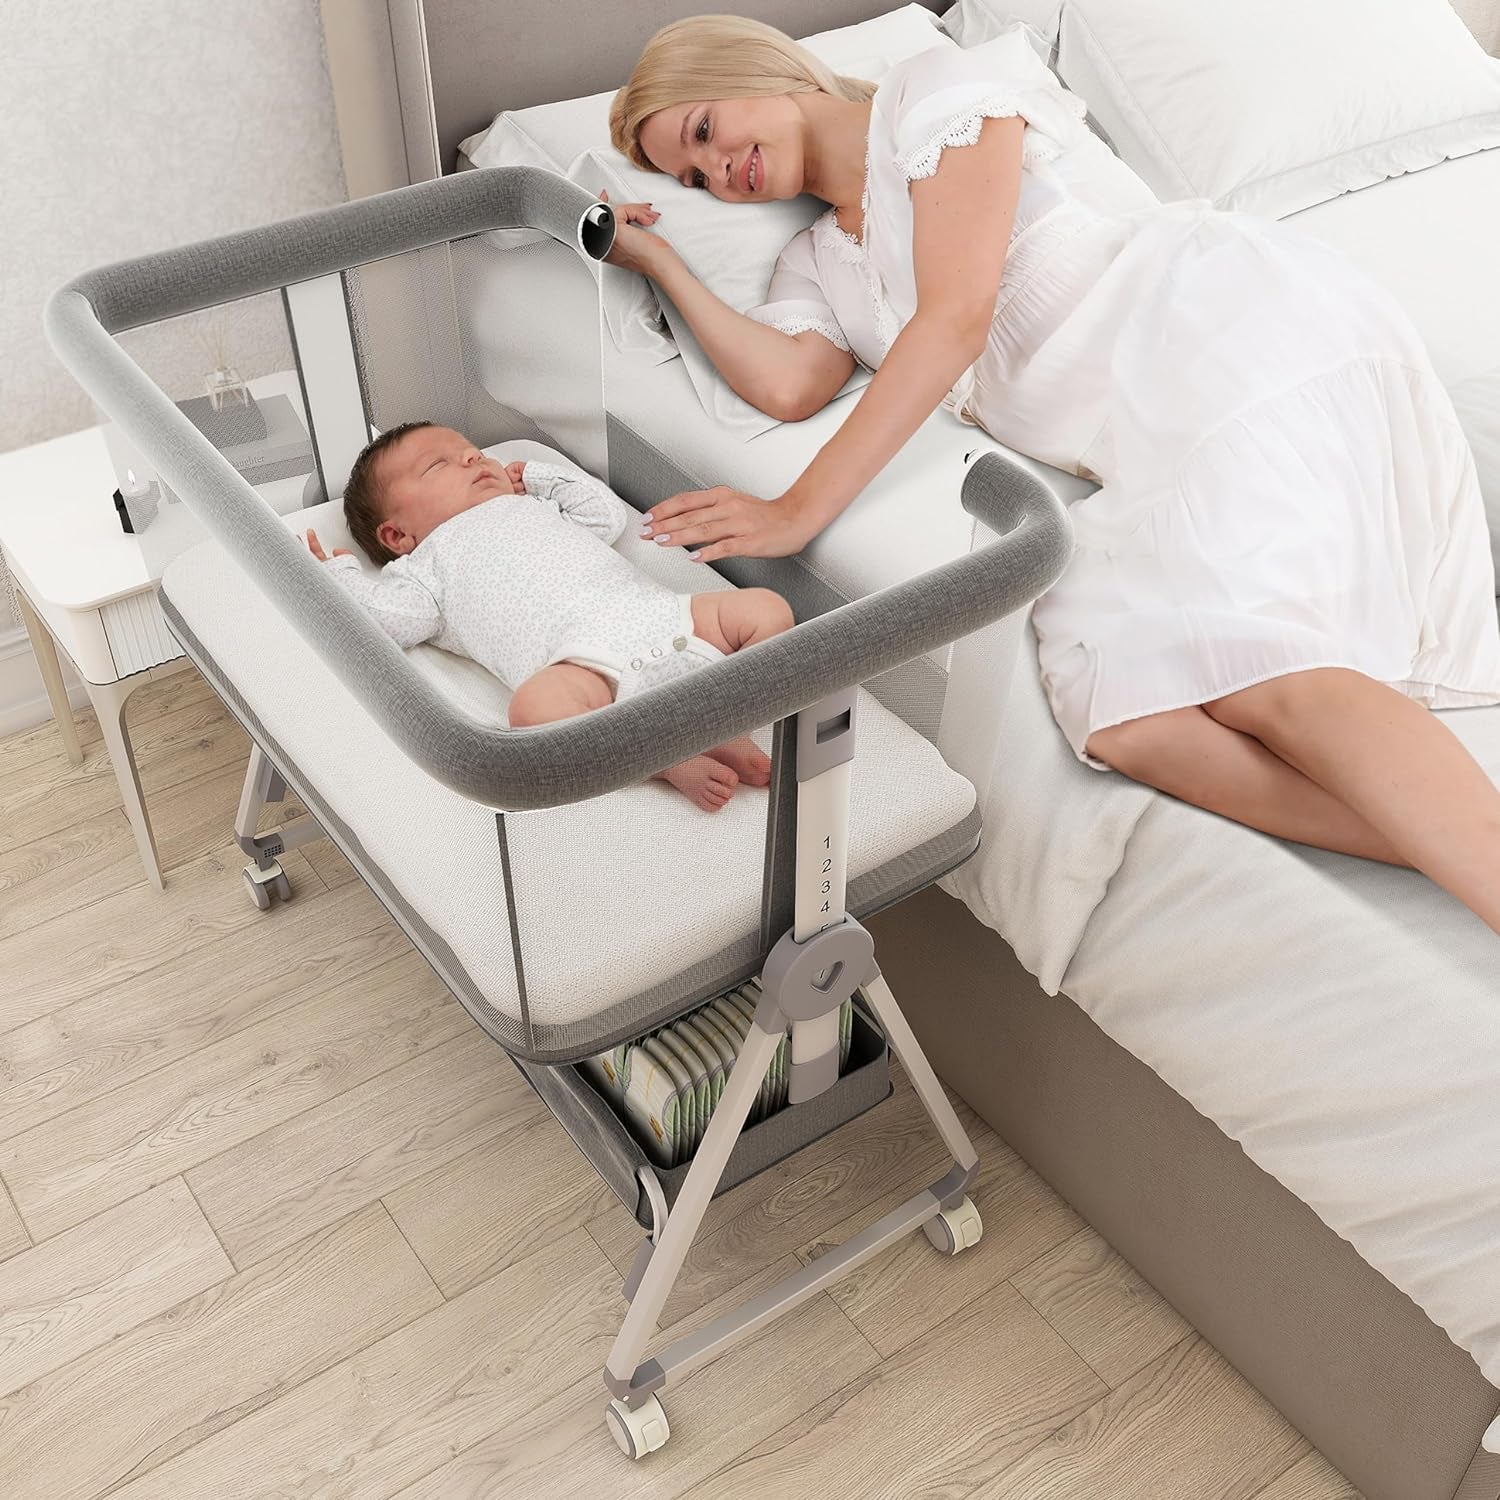 Baby Bassinet Bedside Sleeper with Rocking - All Mesh Portable Bedside Crib for Safe Co-Sleeping, Storage Basket and Wheels, Adjustable Height, Includes Travel Bag, Mosquito Net - Design By Technique